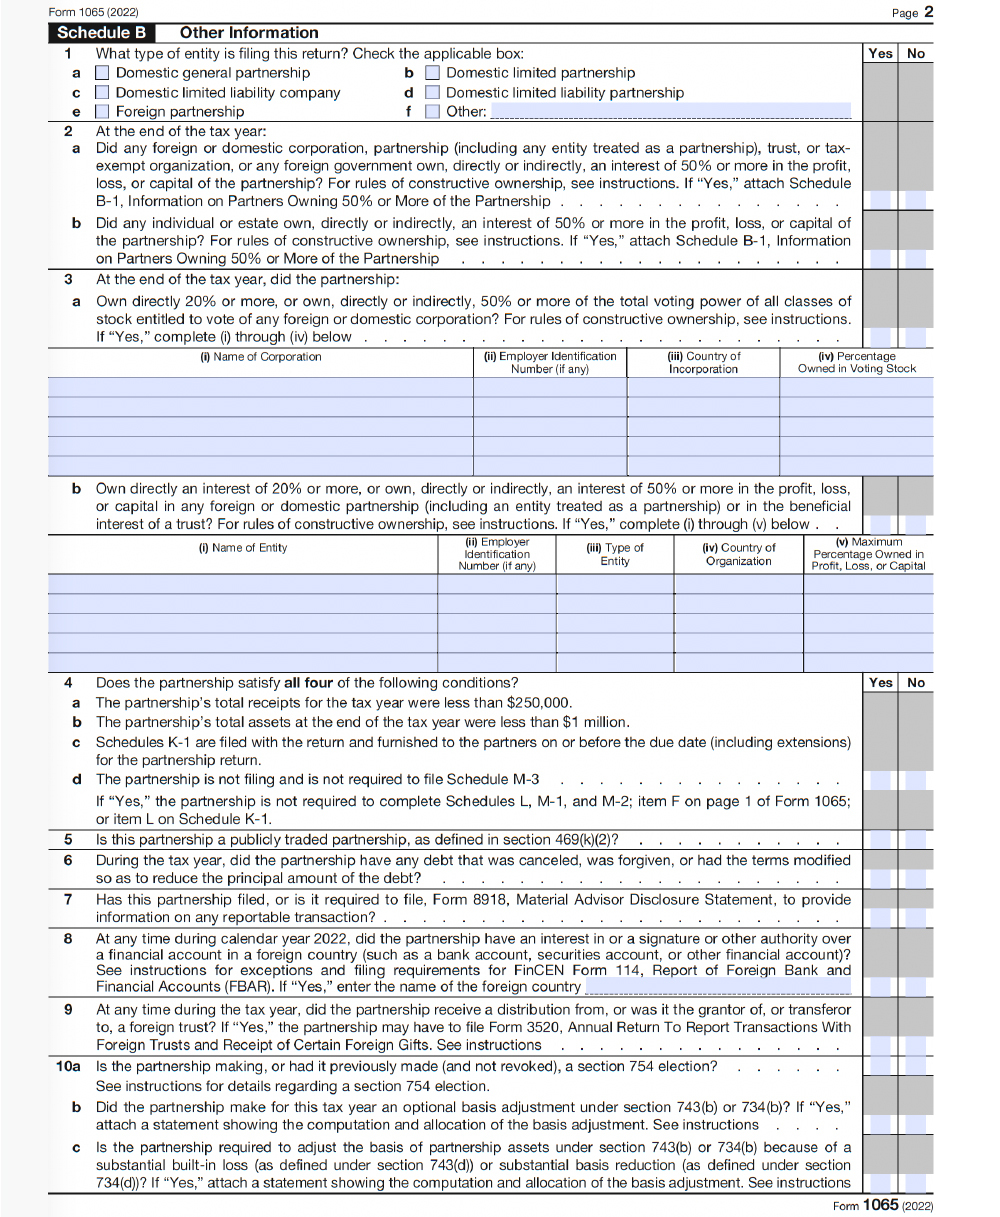 IRS Form 1065 - Schedule B